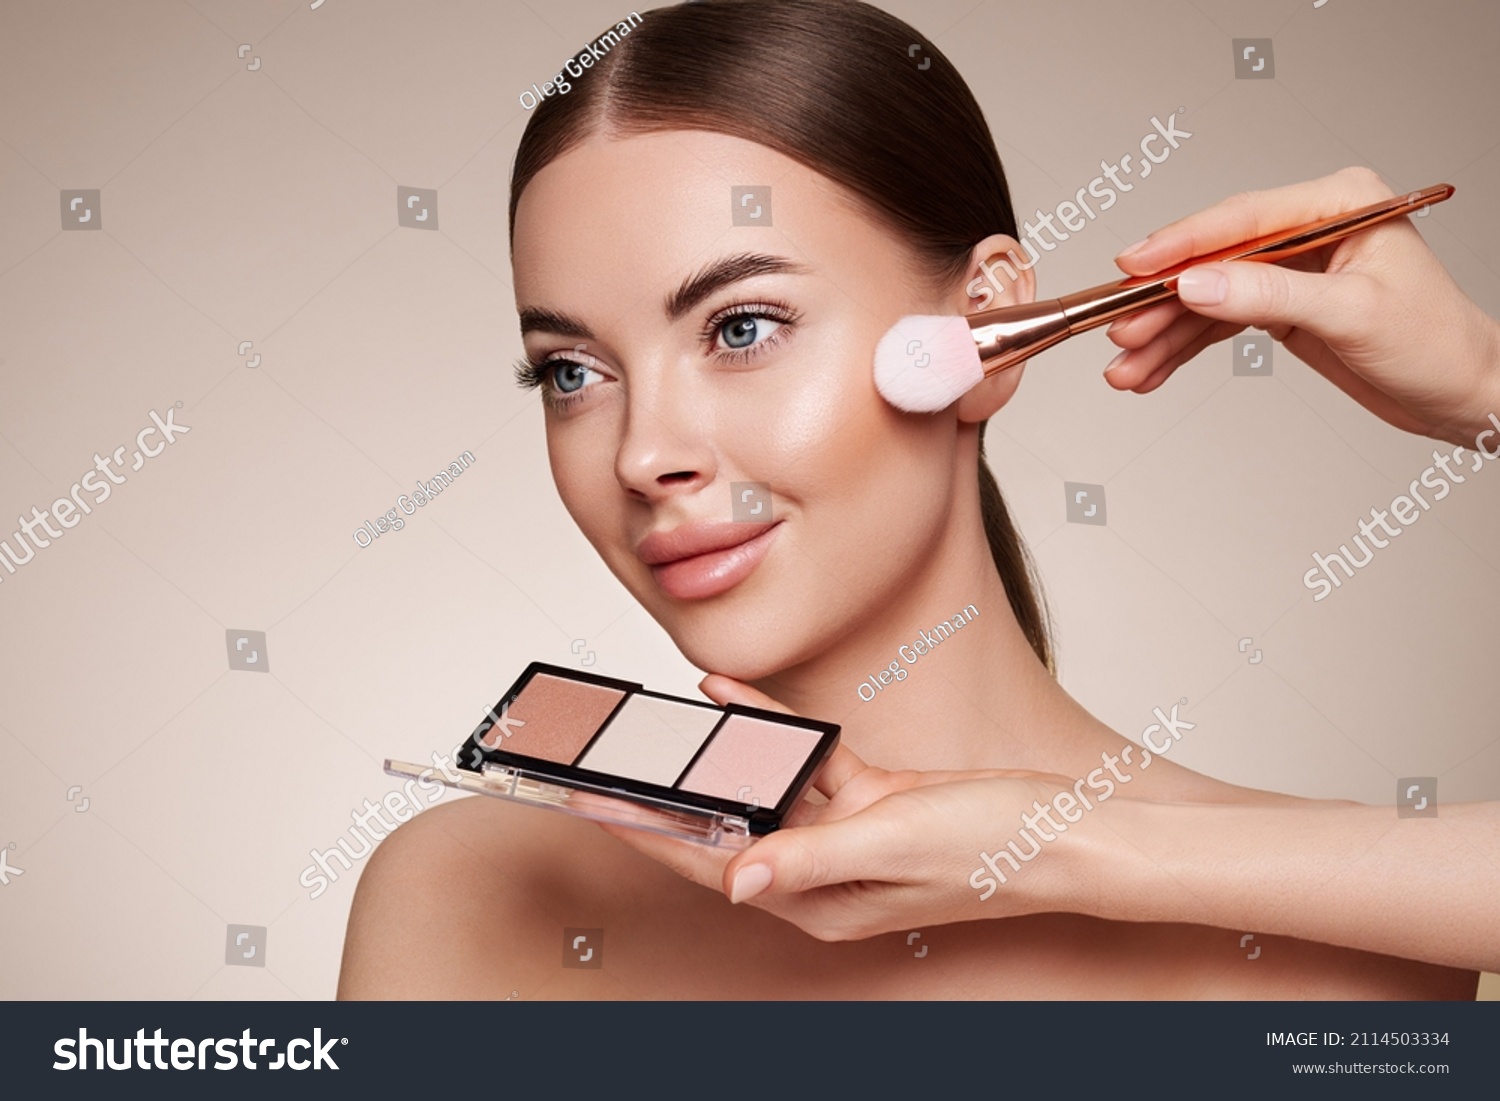 Makeup Artist applies Eye Shadow. Beautiful Woman Face. Perfect Makeup. Make-up detail. Beauty Girl with Perfect Skin. Nails and Manicure. Eye Shadow Palette #2114503334